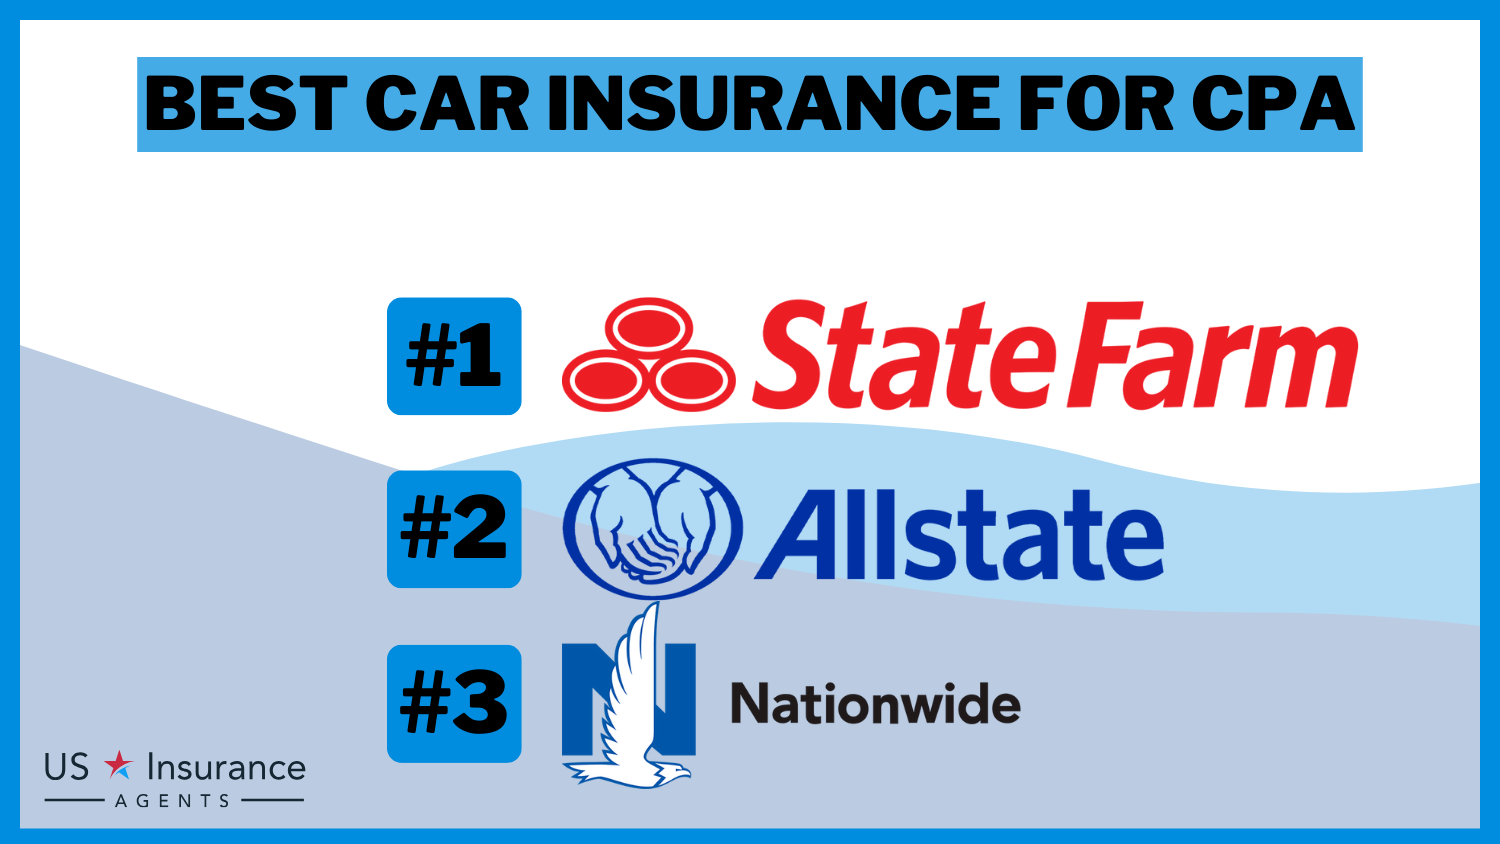 Best Car Insurance for CPA: State Farm, Allstate, Nationwide